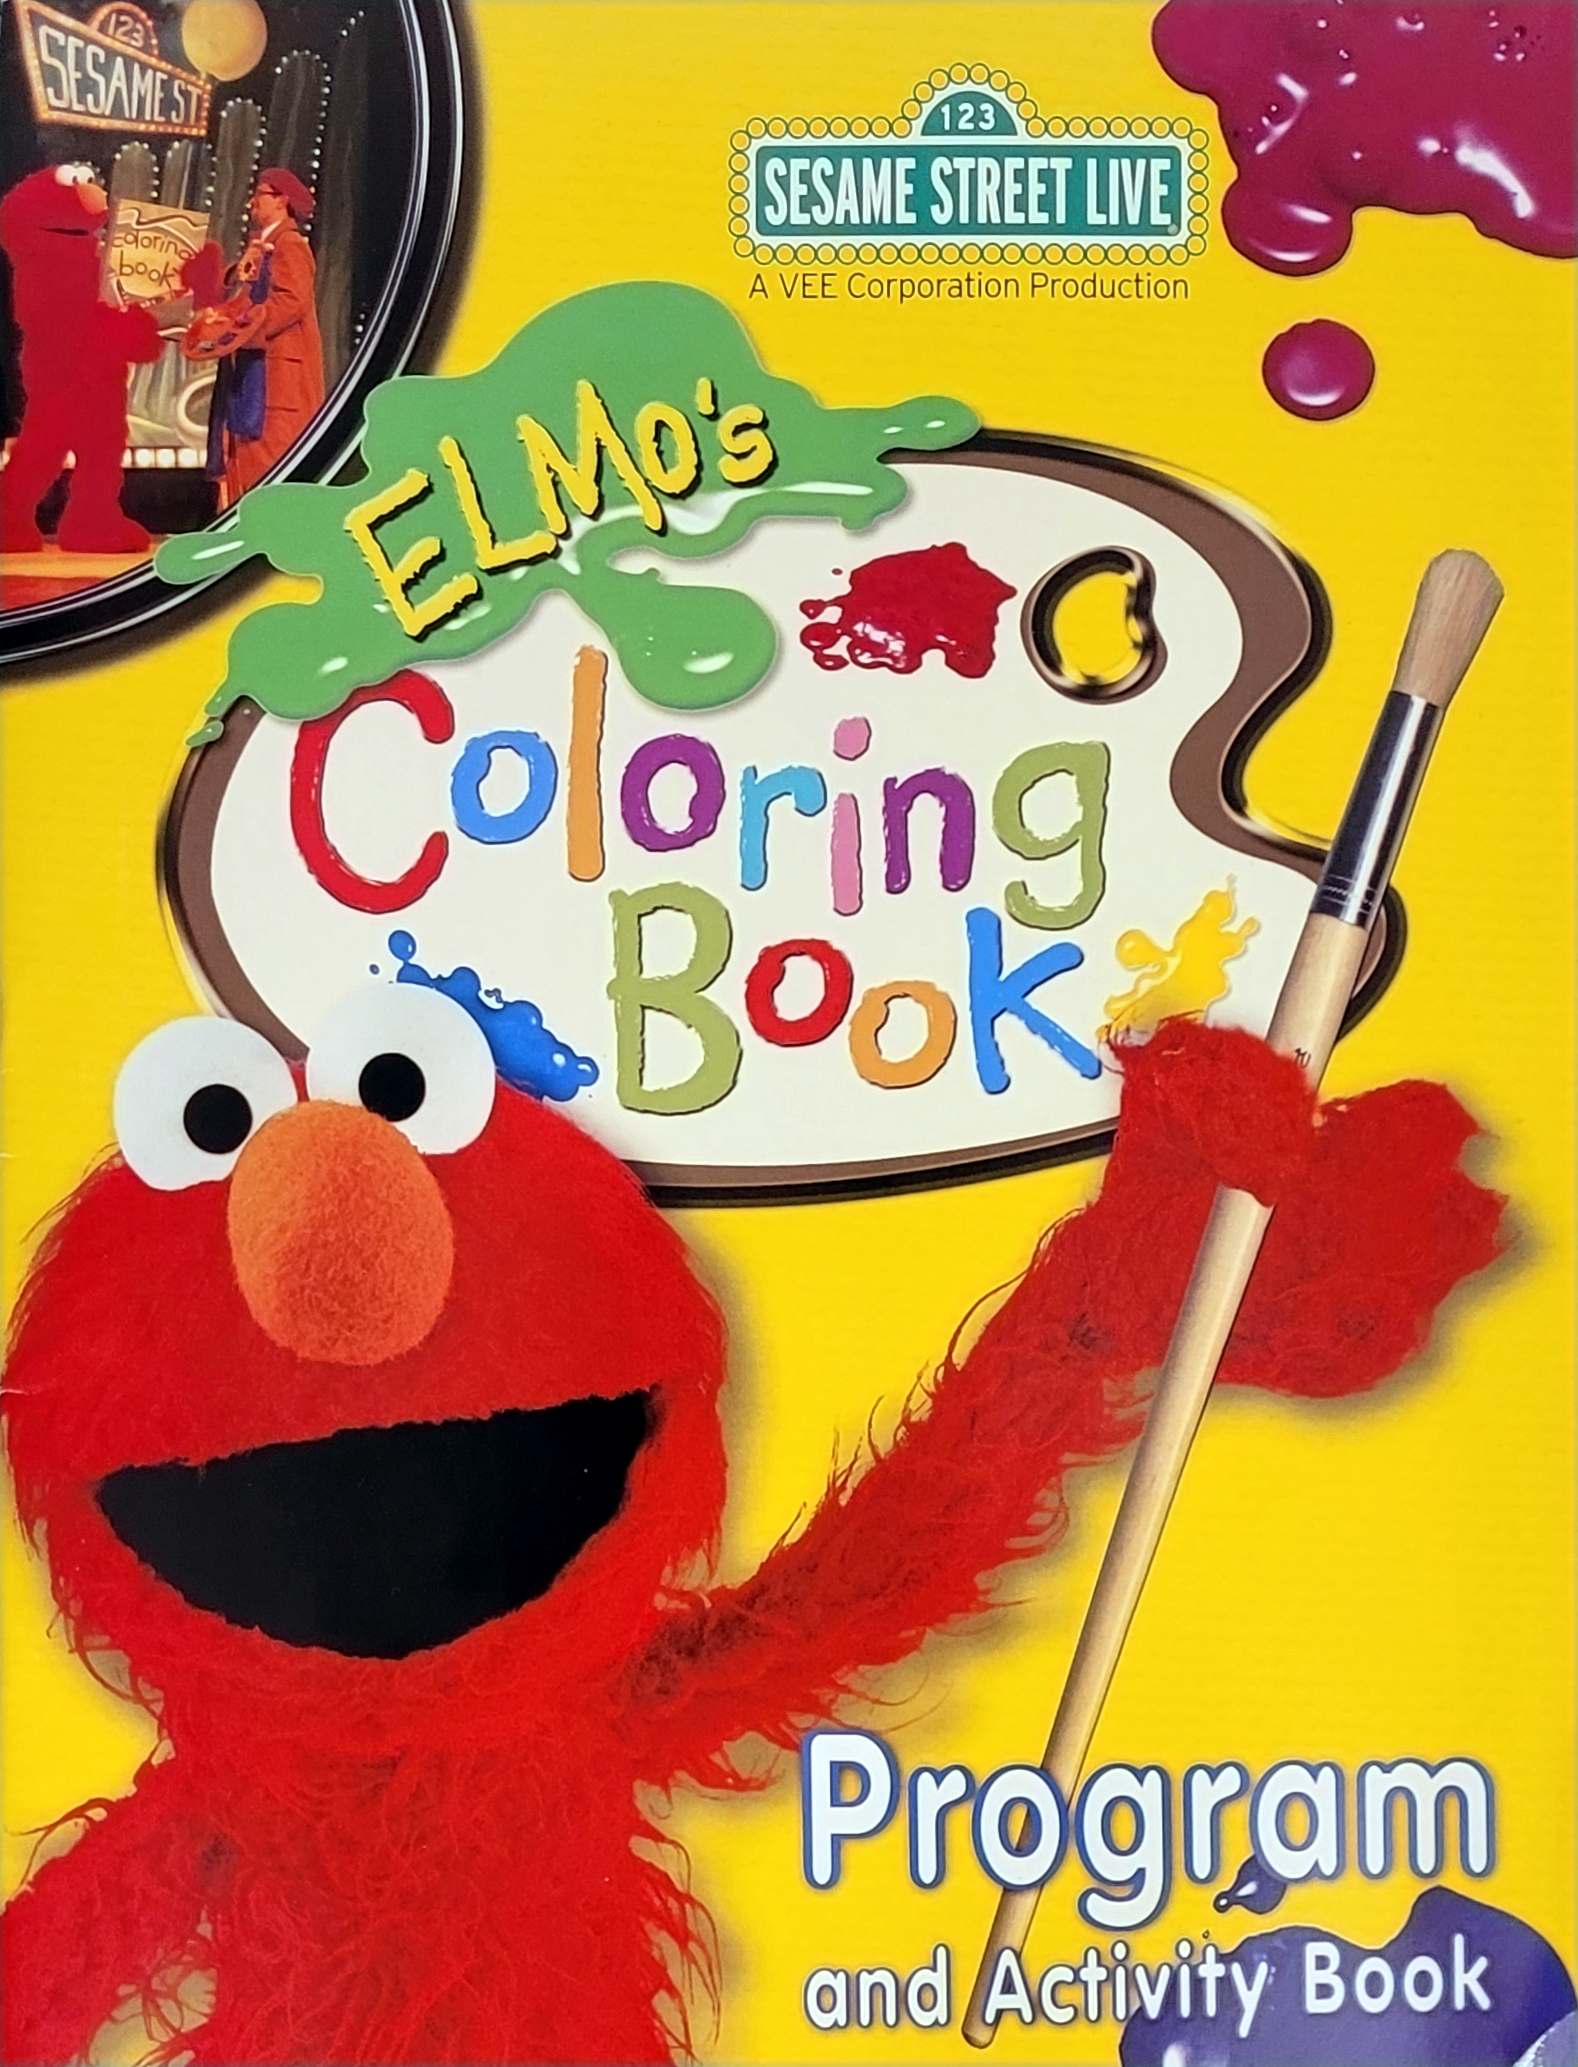 Elmo's Coloring Book | Muppet Wiki | FANDOM powered by Wikia